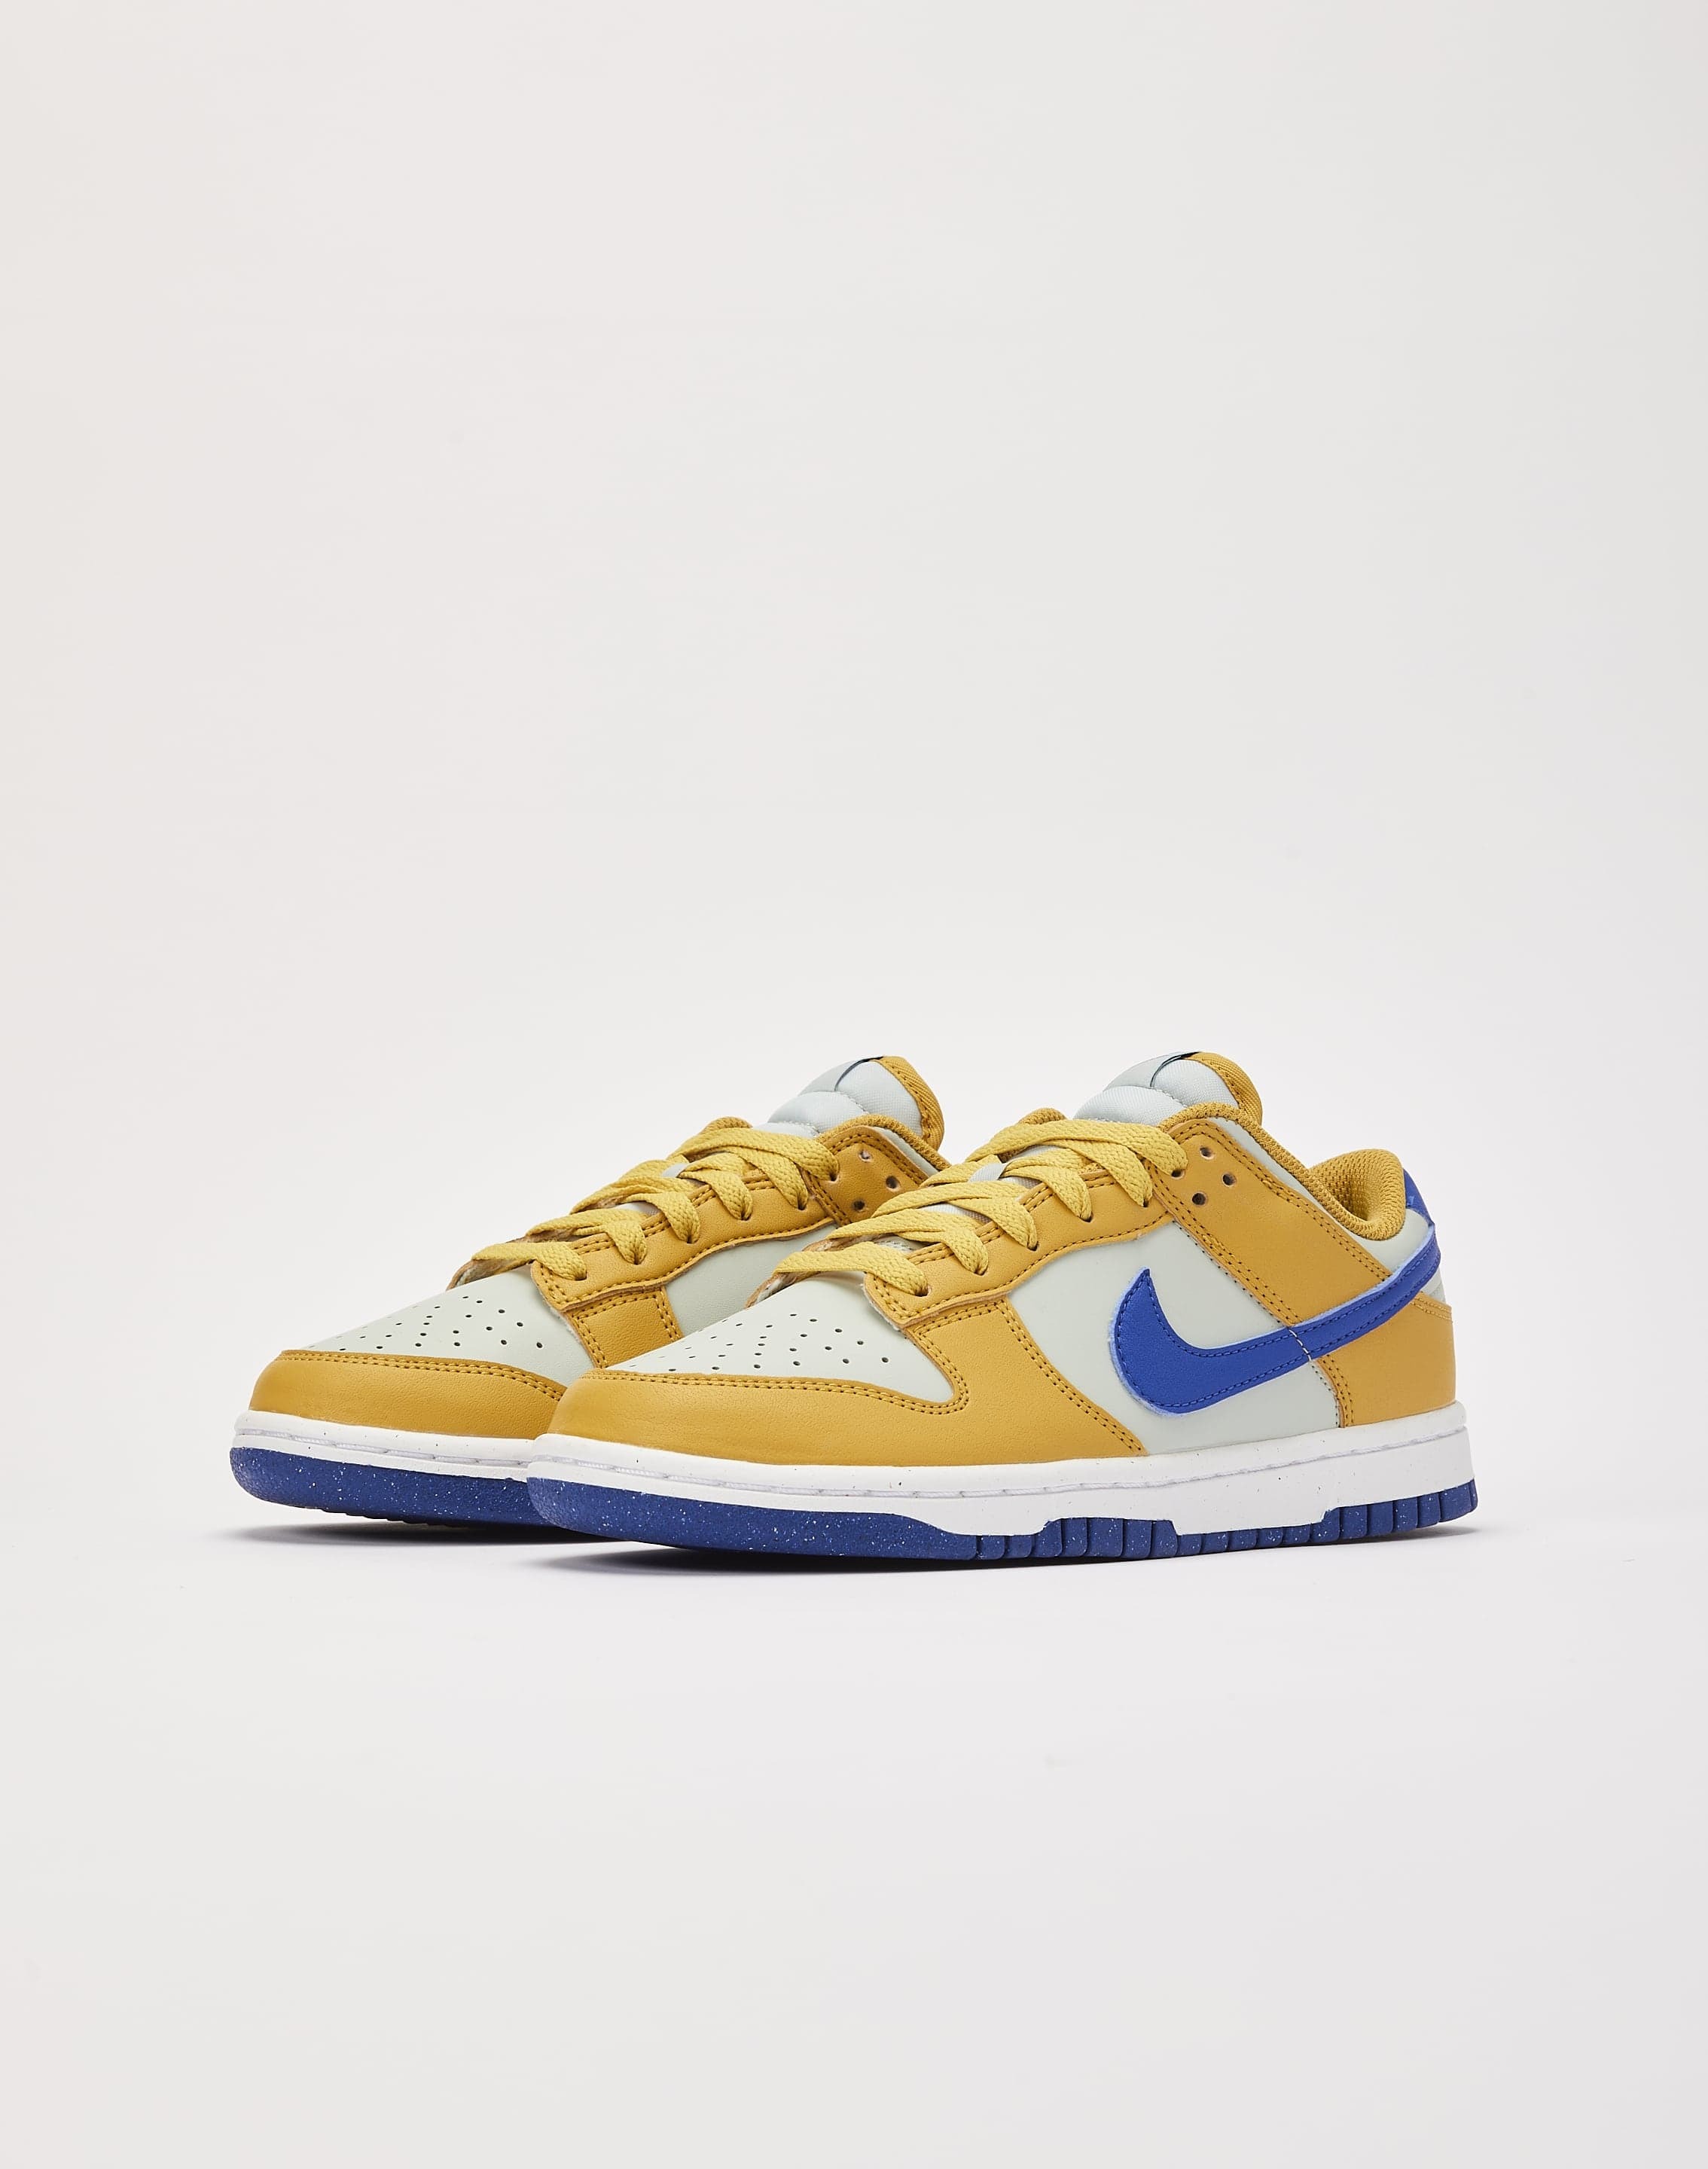 WOMENS NIKE DUNK LOW NEXT NATURE “Wheat Gold” Dropped on DTLR